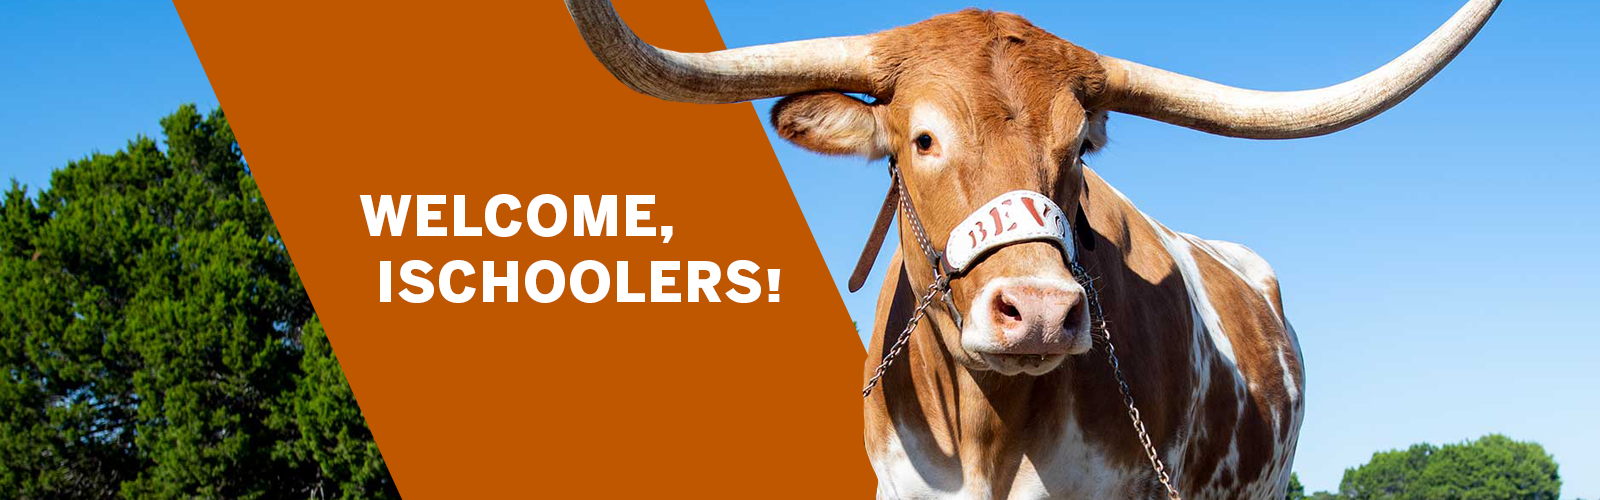 Welcome Longhorns Banner